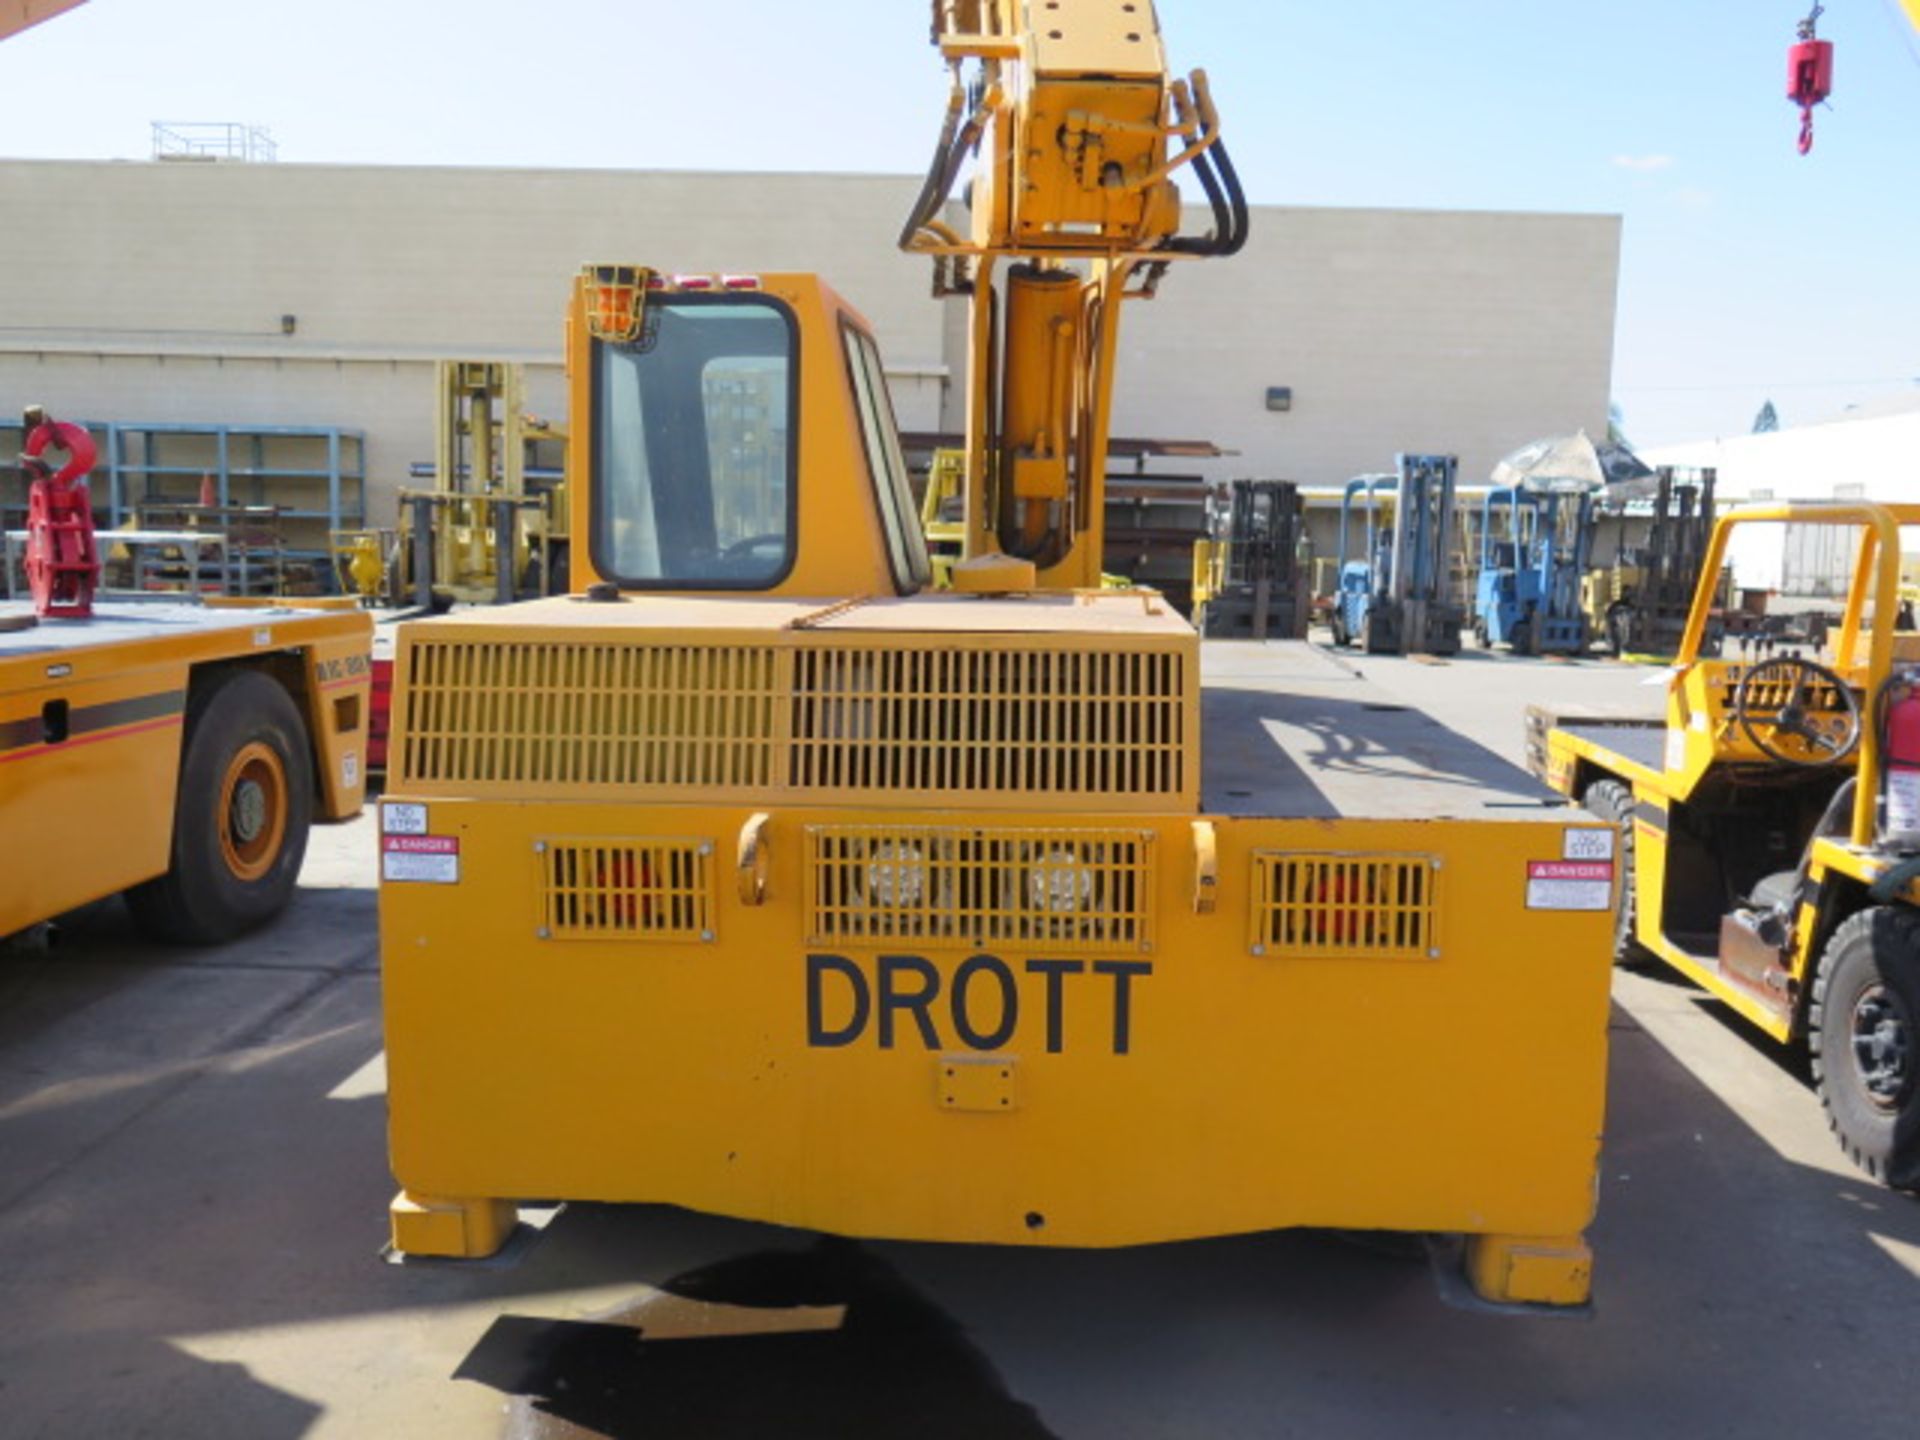 Drott 3330 12,000 Lb Cap (On Outriggers) Diesel Carry Deck Crane s/n 6225056 w/ 34’ Lift, SOLD AS IS - Image 6 of 23